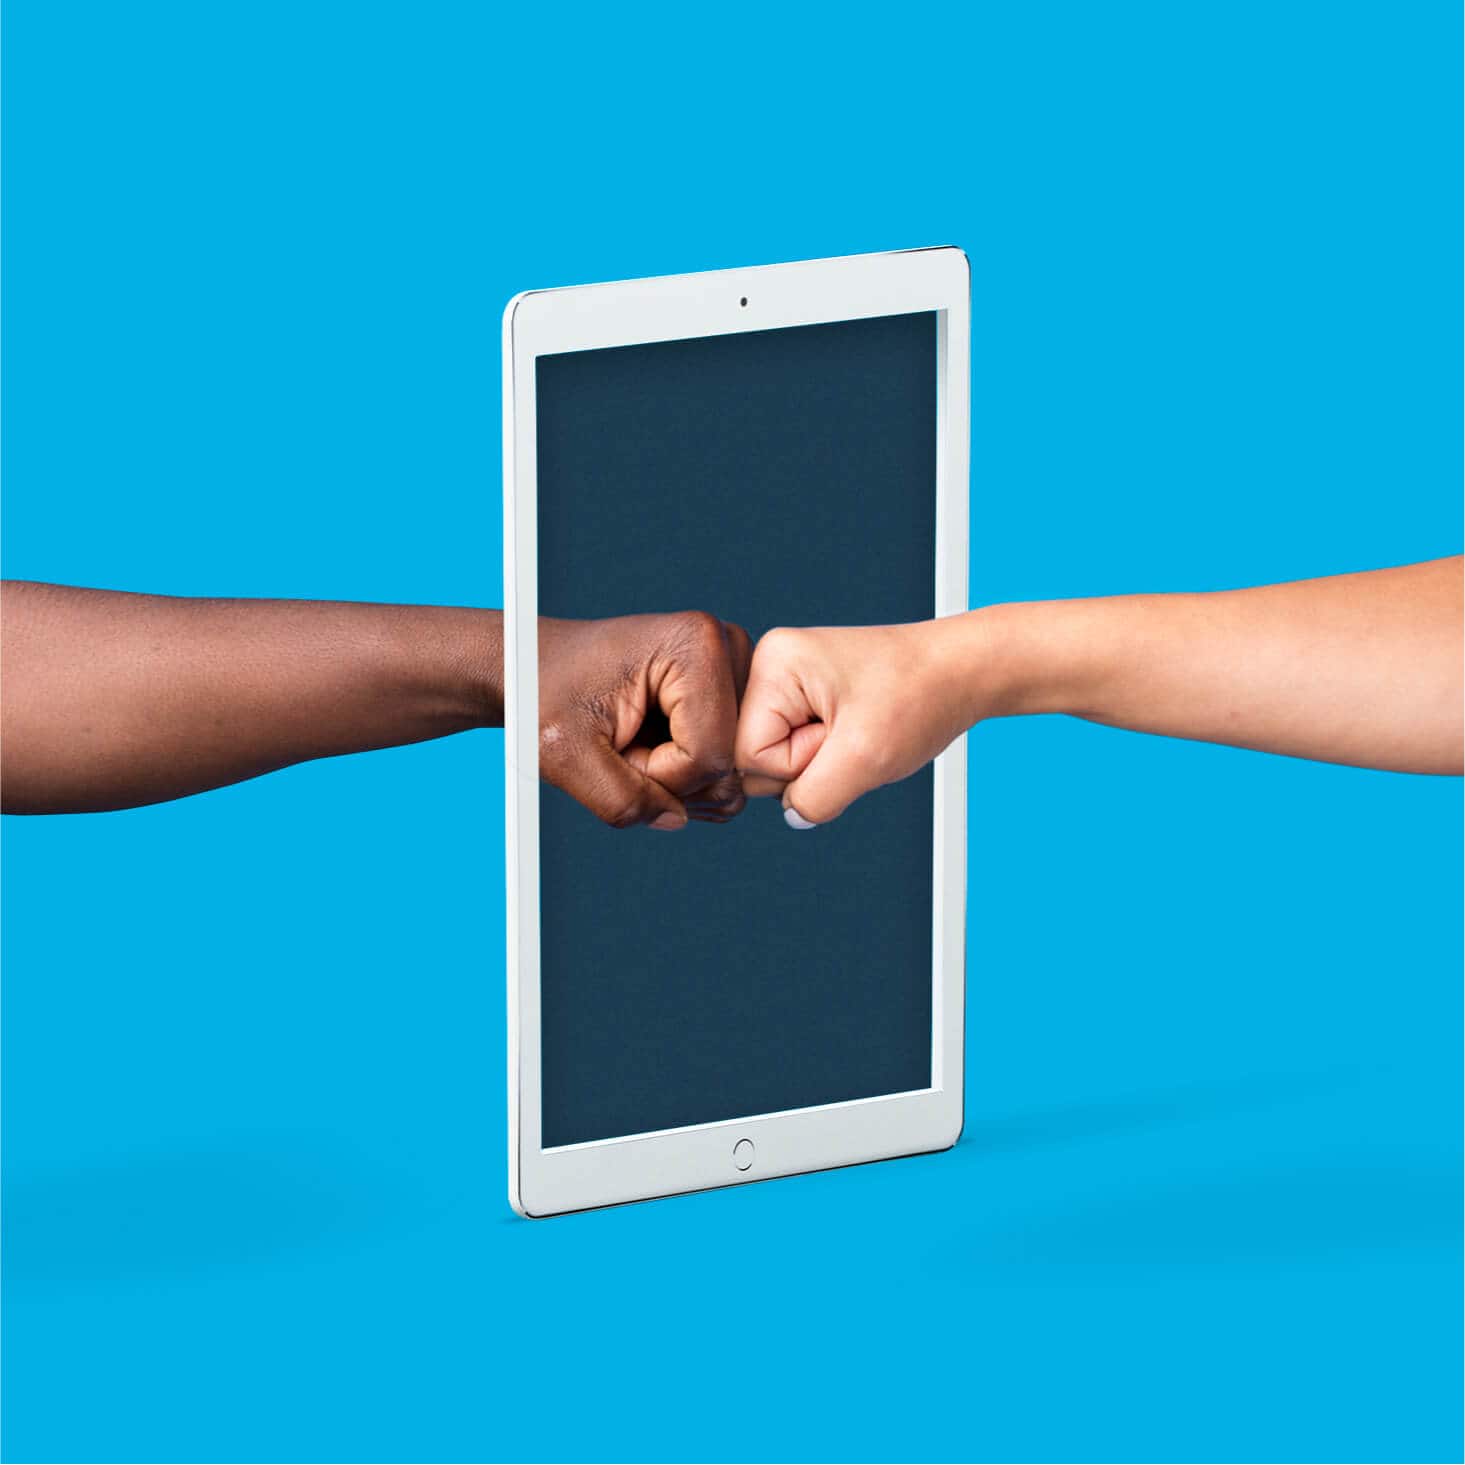 Two hands fist bump through a device to show that eInvoicing is instant, direct and electronic.